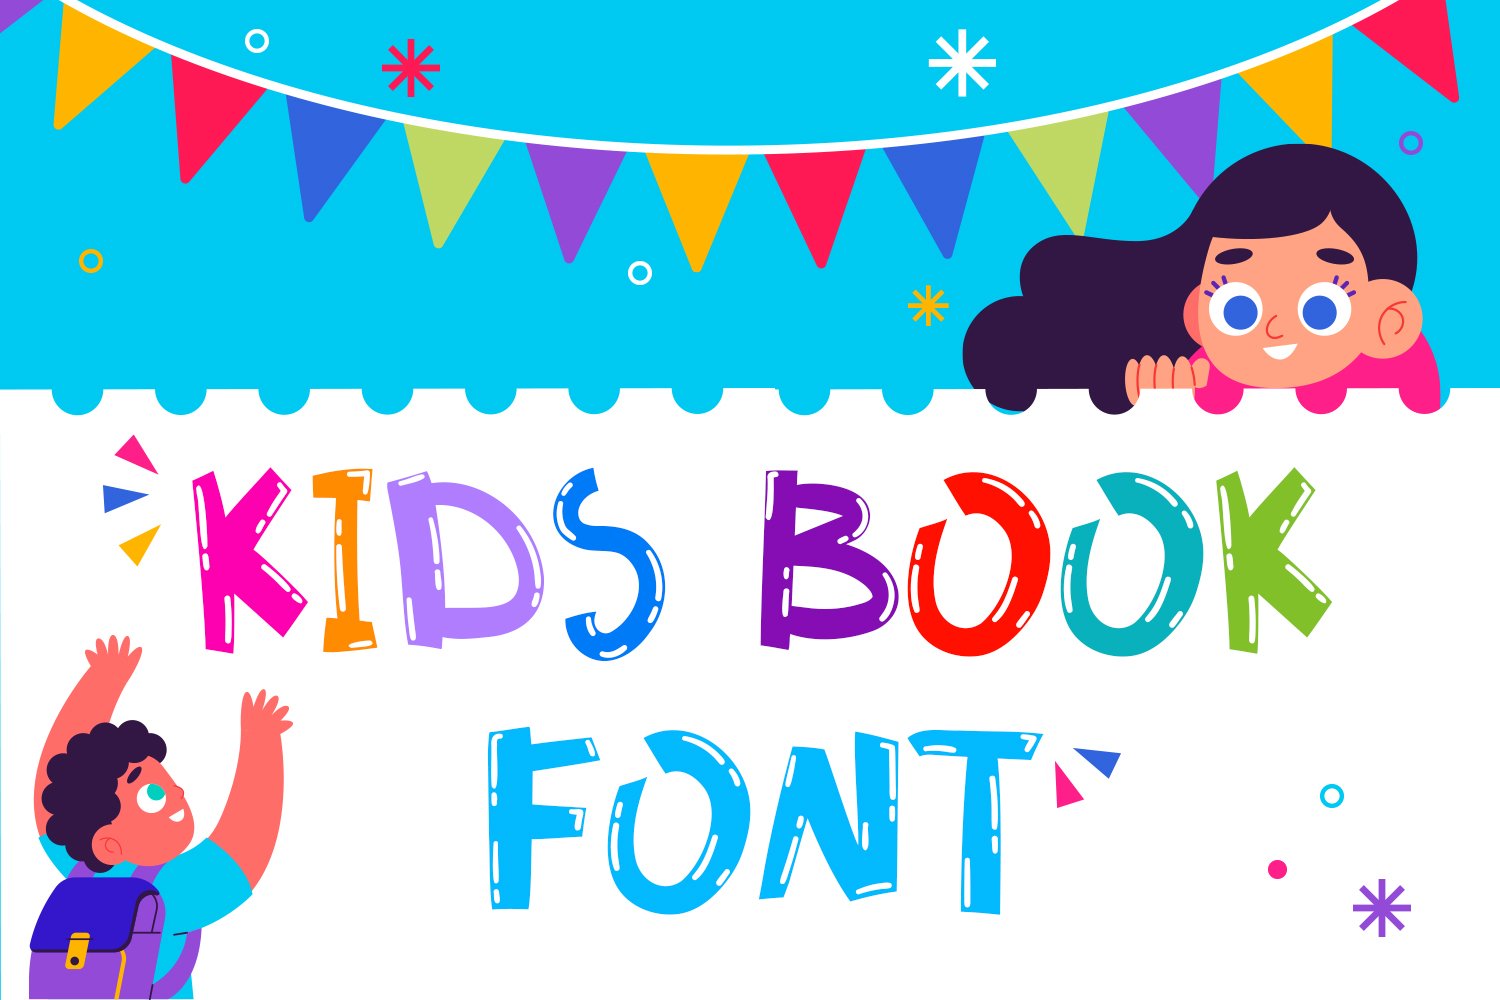 Kids Book Font cover image.